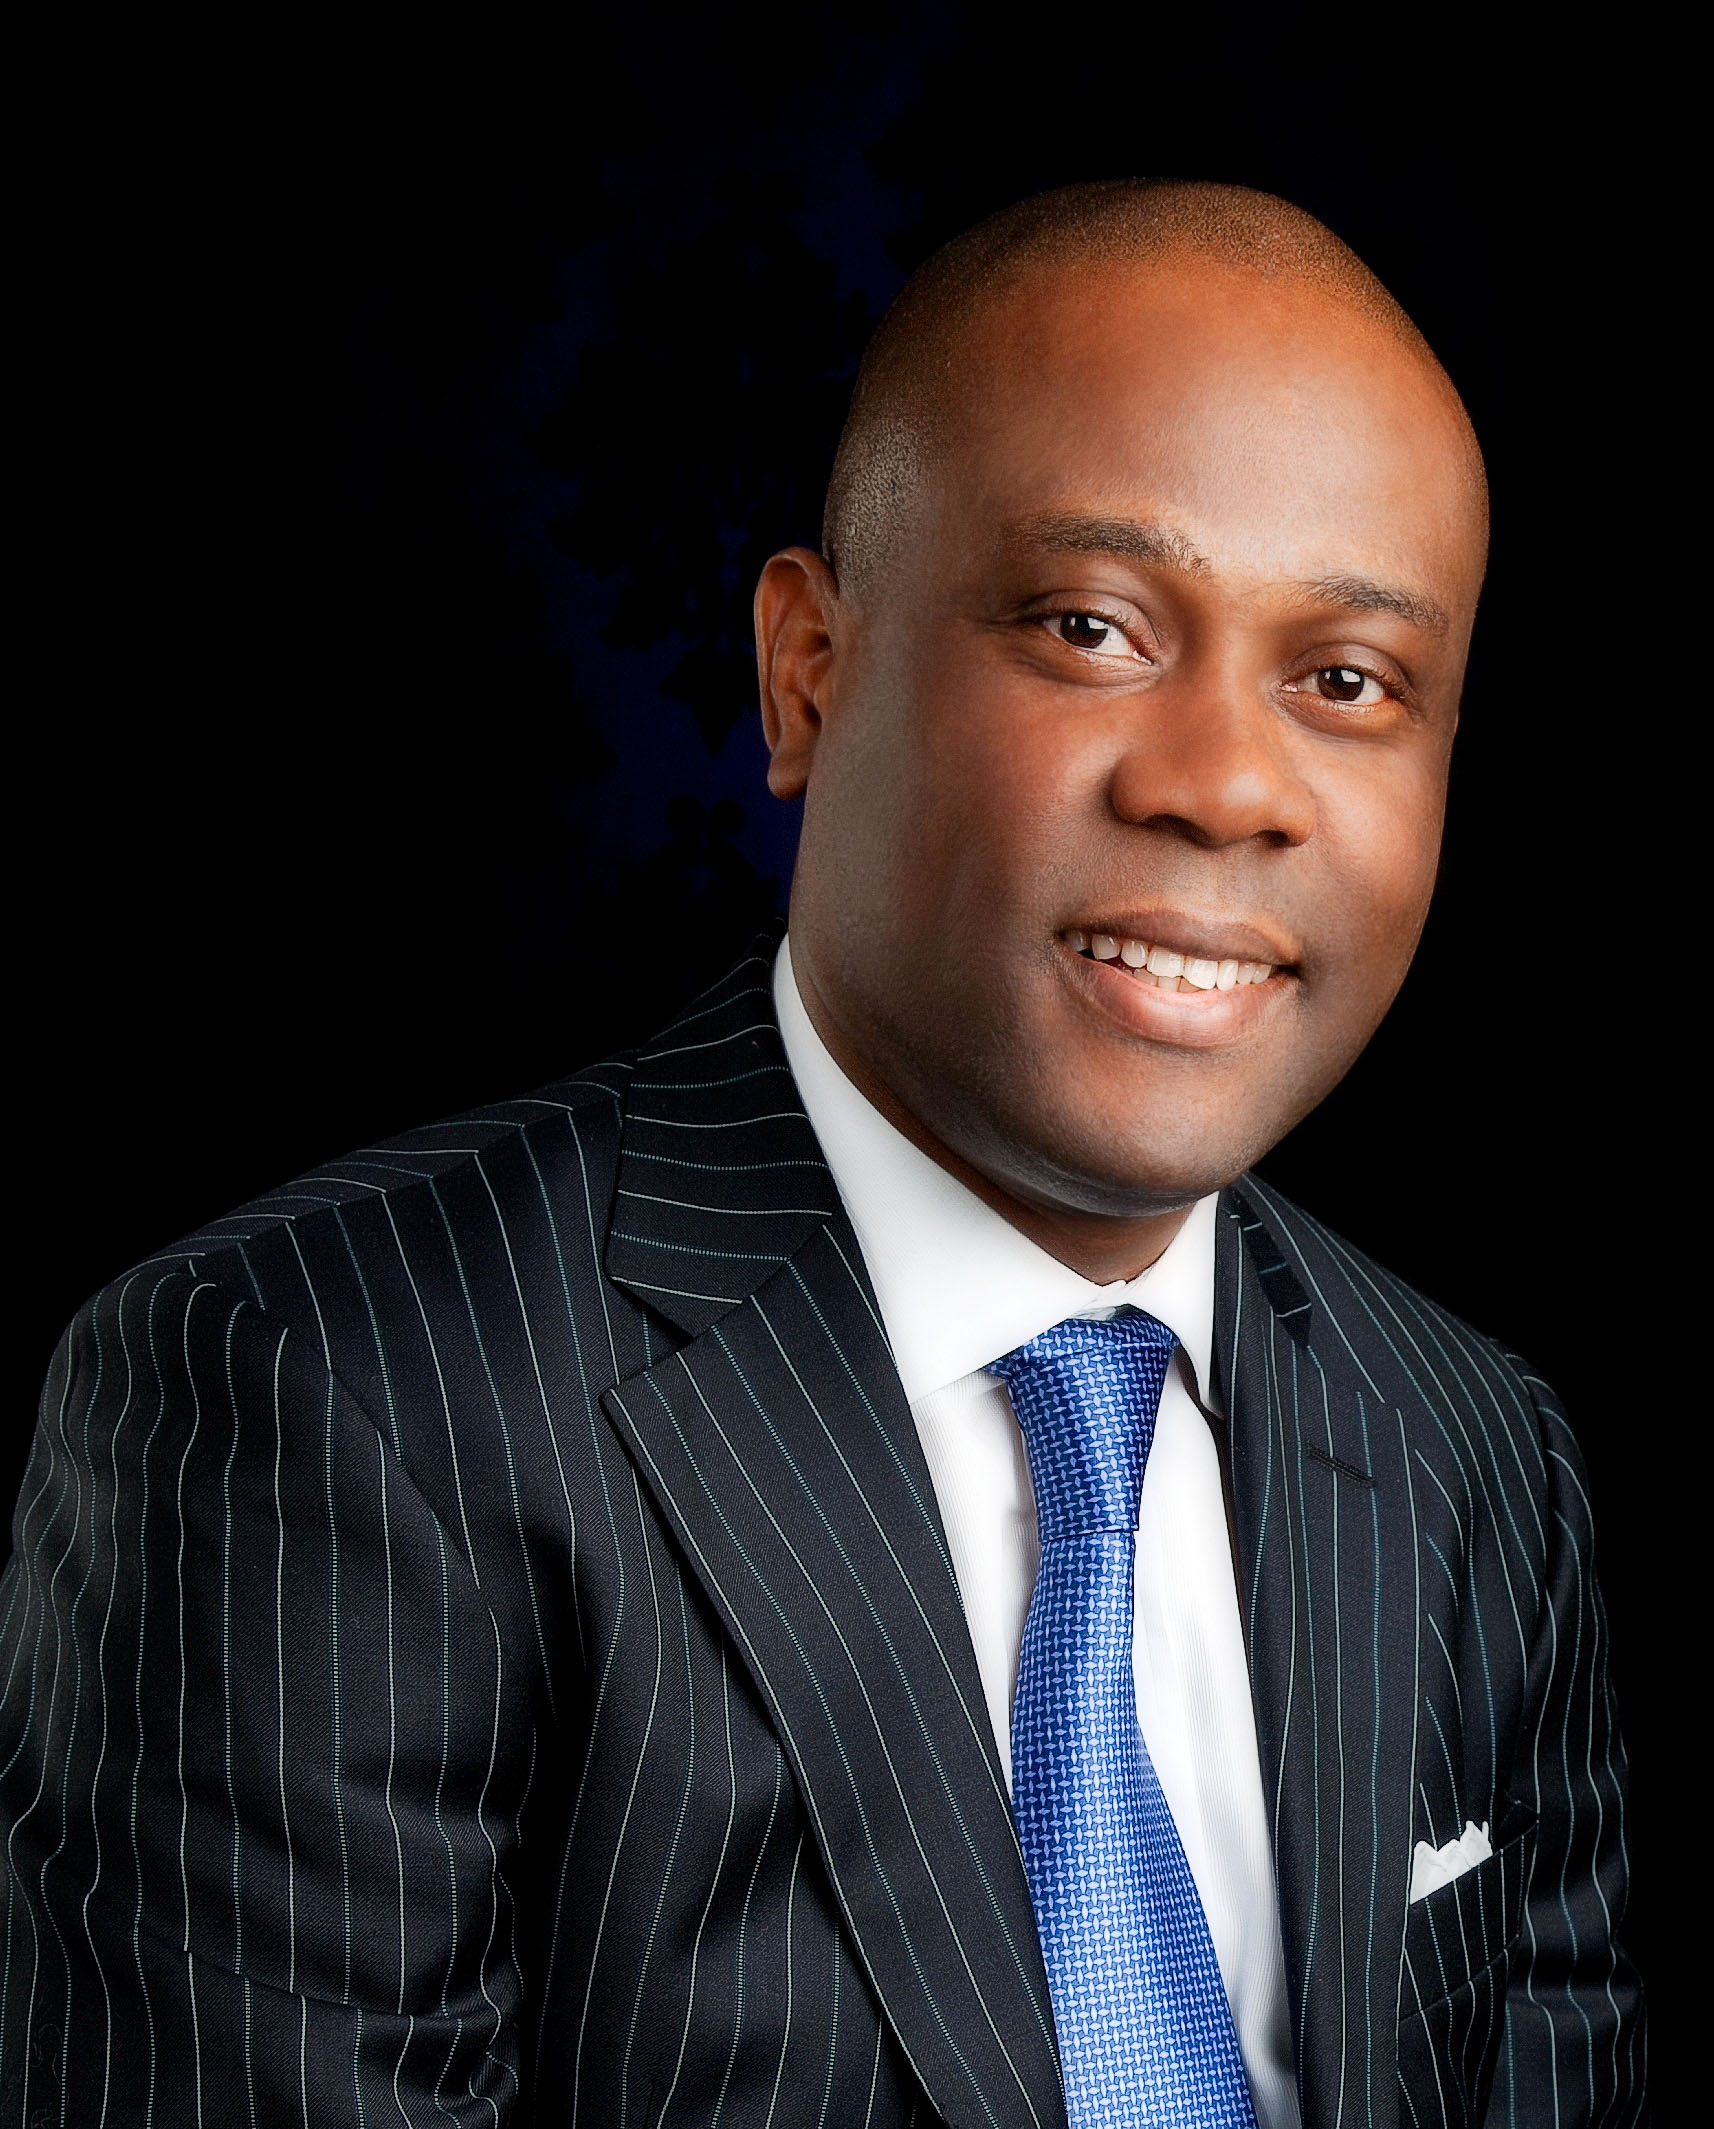 Access Bank CEO,Herbert Wigwe is African Banker of the Year for the Second Time